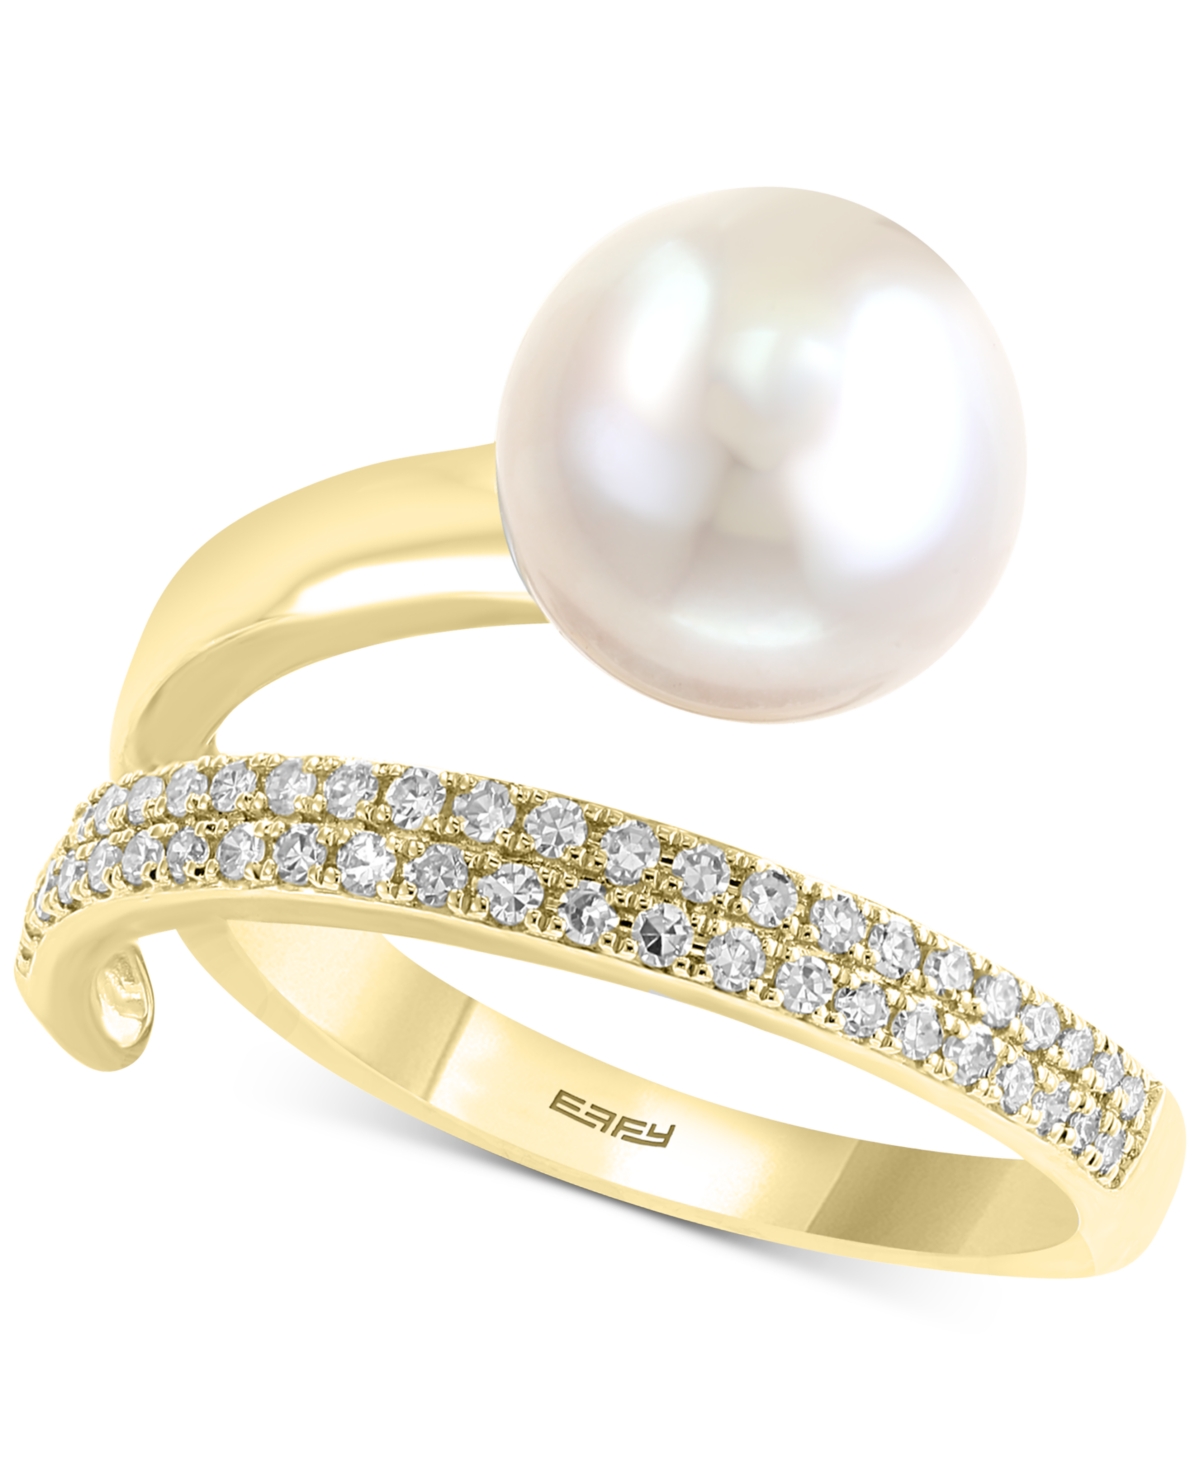 Effy Collection Effy Cultured Freshwater Pearl (10mm) and Diamond (1/5 ct. t.w.) Ring in 14k White Gold and Yellow Gold